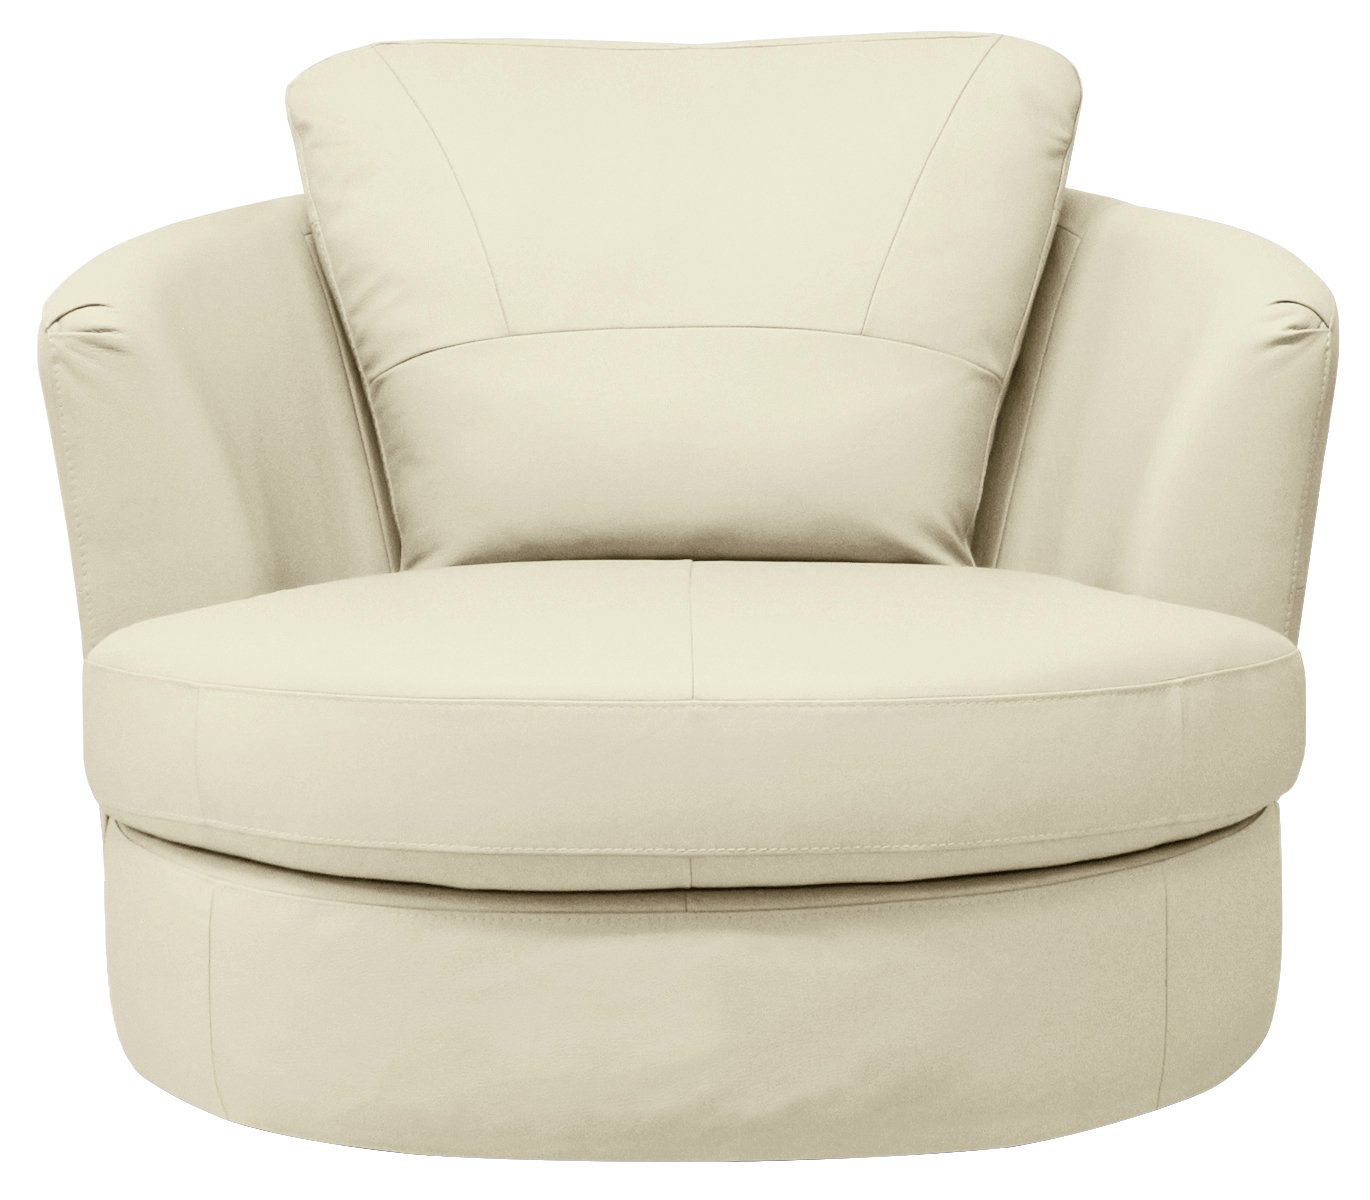 Argos Home Milano Leather Swivel Chair - Ivory